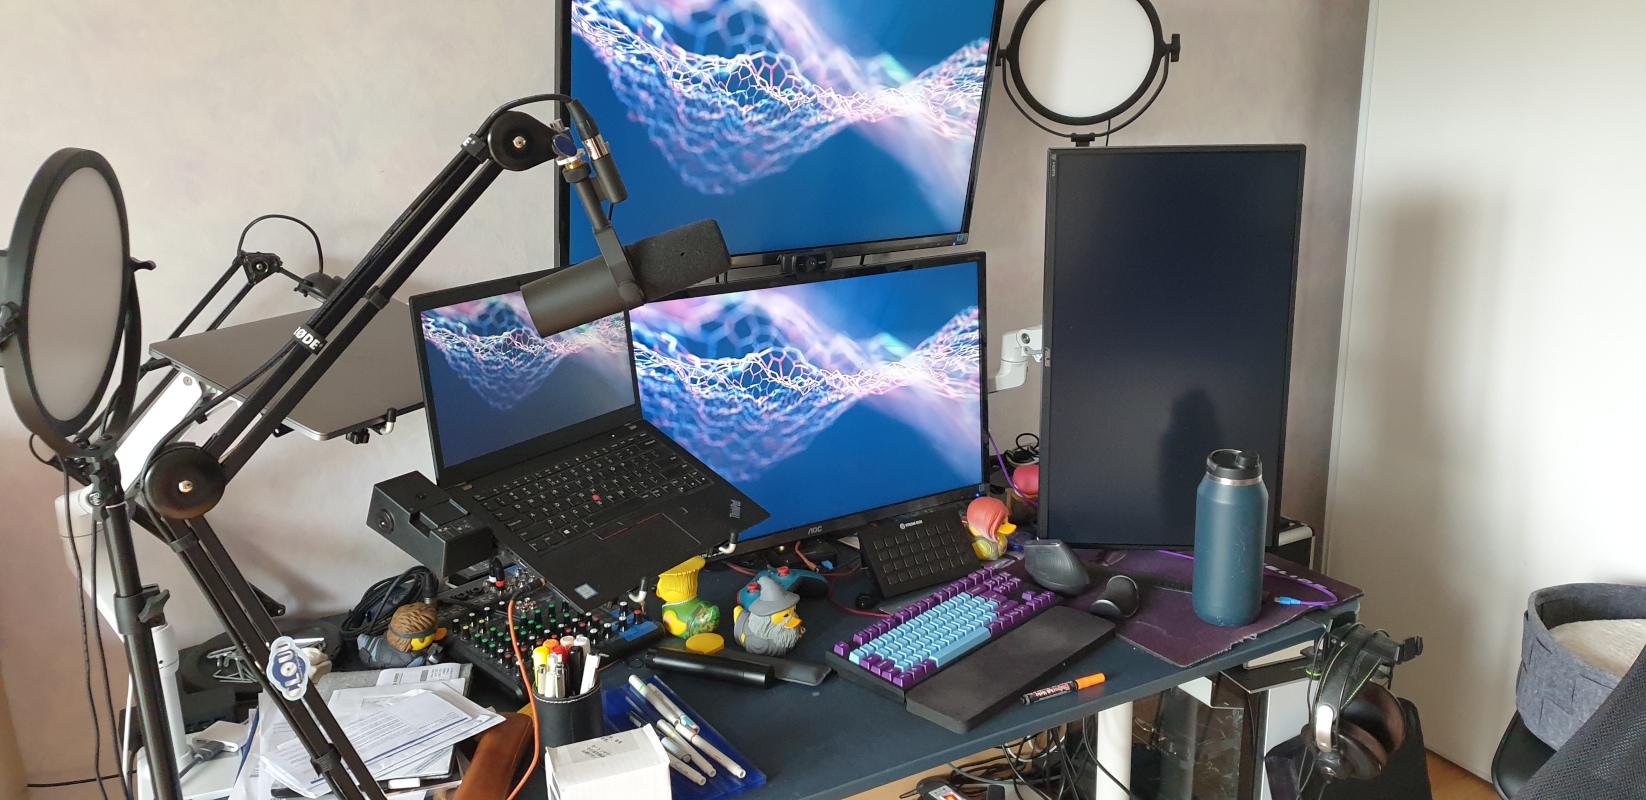 my desk with all the items described below. It is a bit cluttered